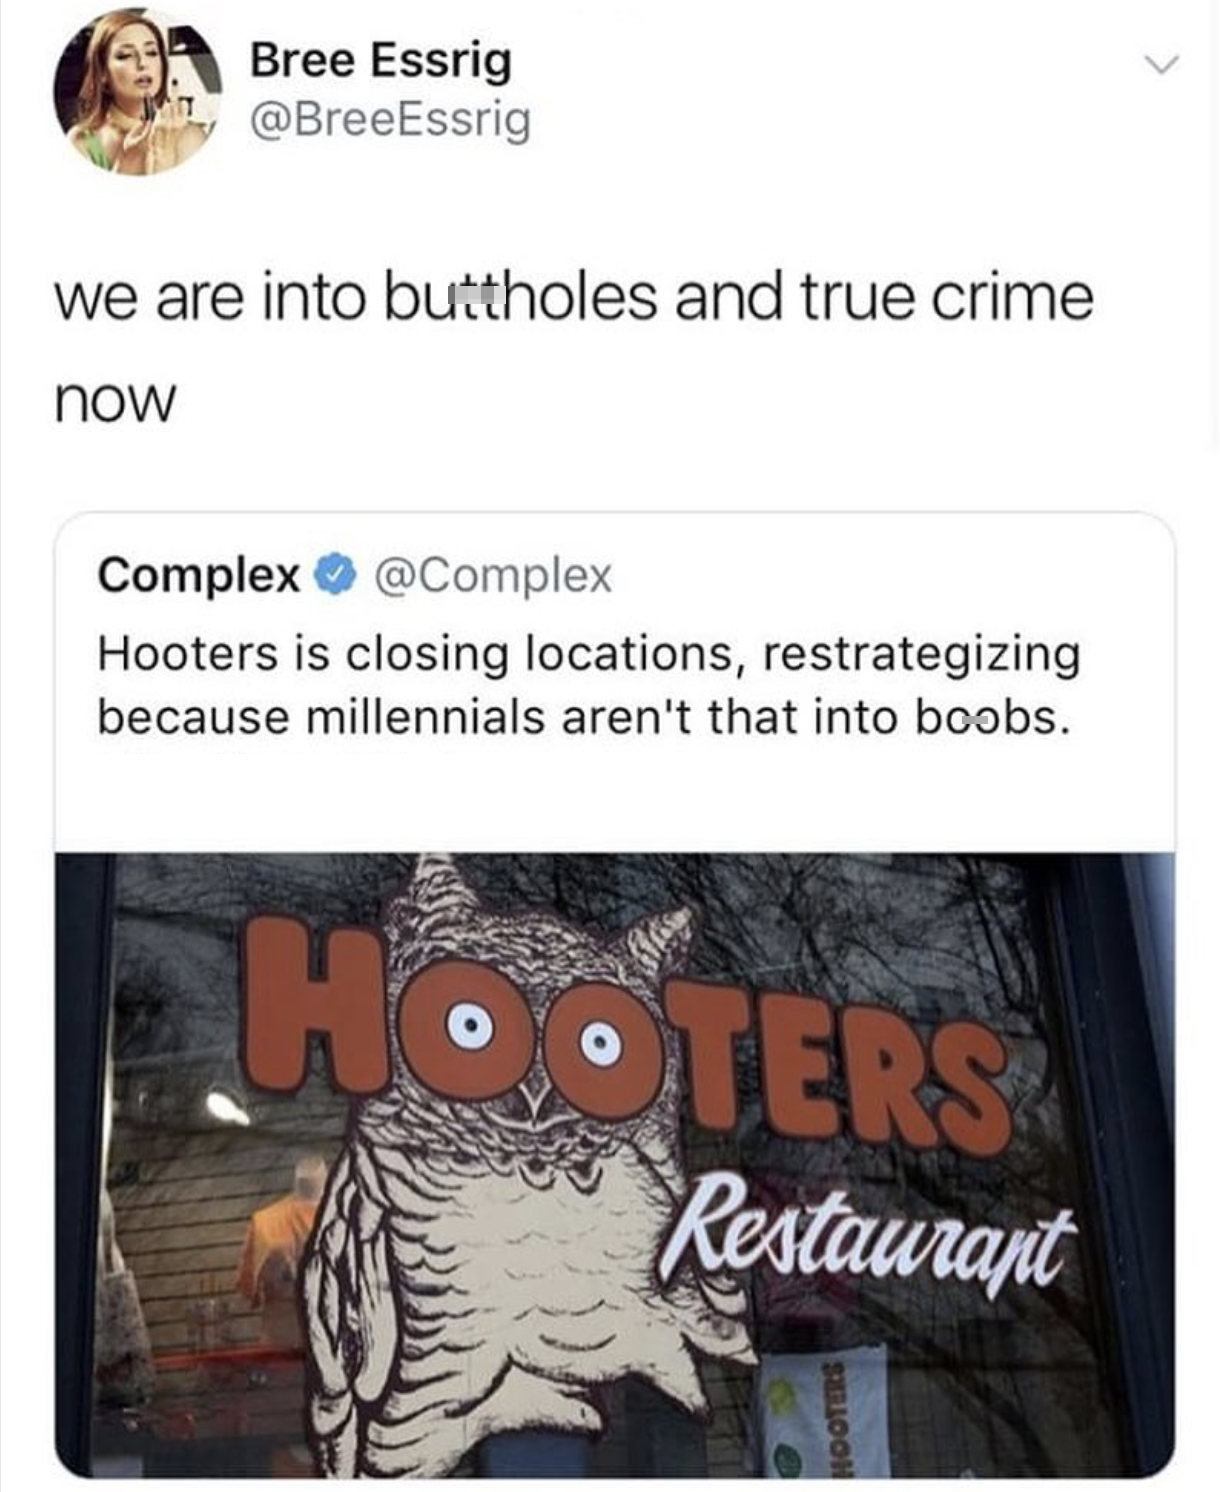 dank memes - media - Bree Essrig we are into buttholes and true crime now Complex Hooters is closing locations, restrategizing because millennials aren't that into boobs. Hooters Restaurant Hootere